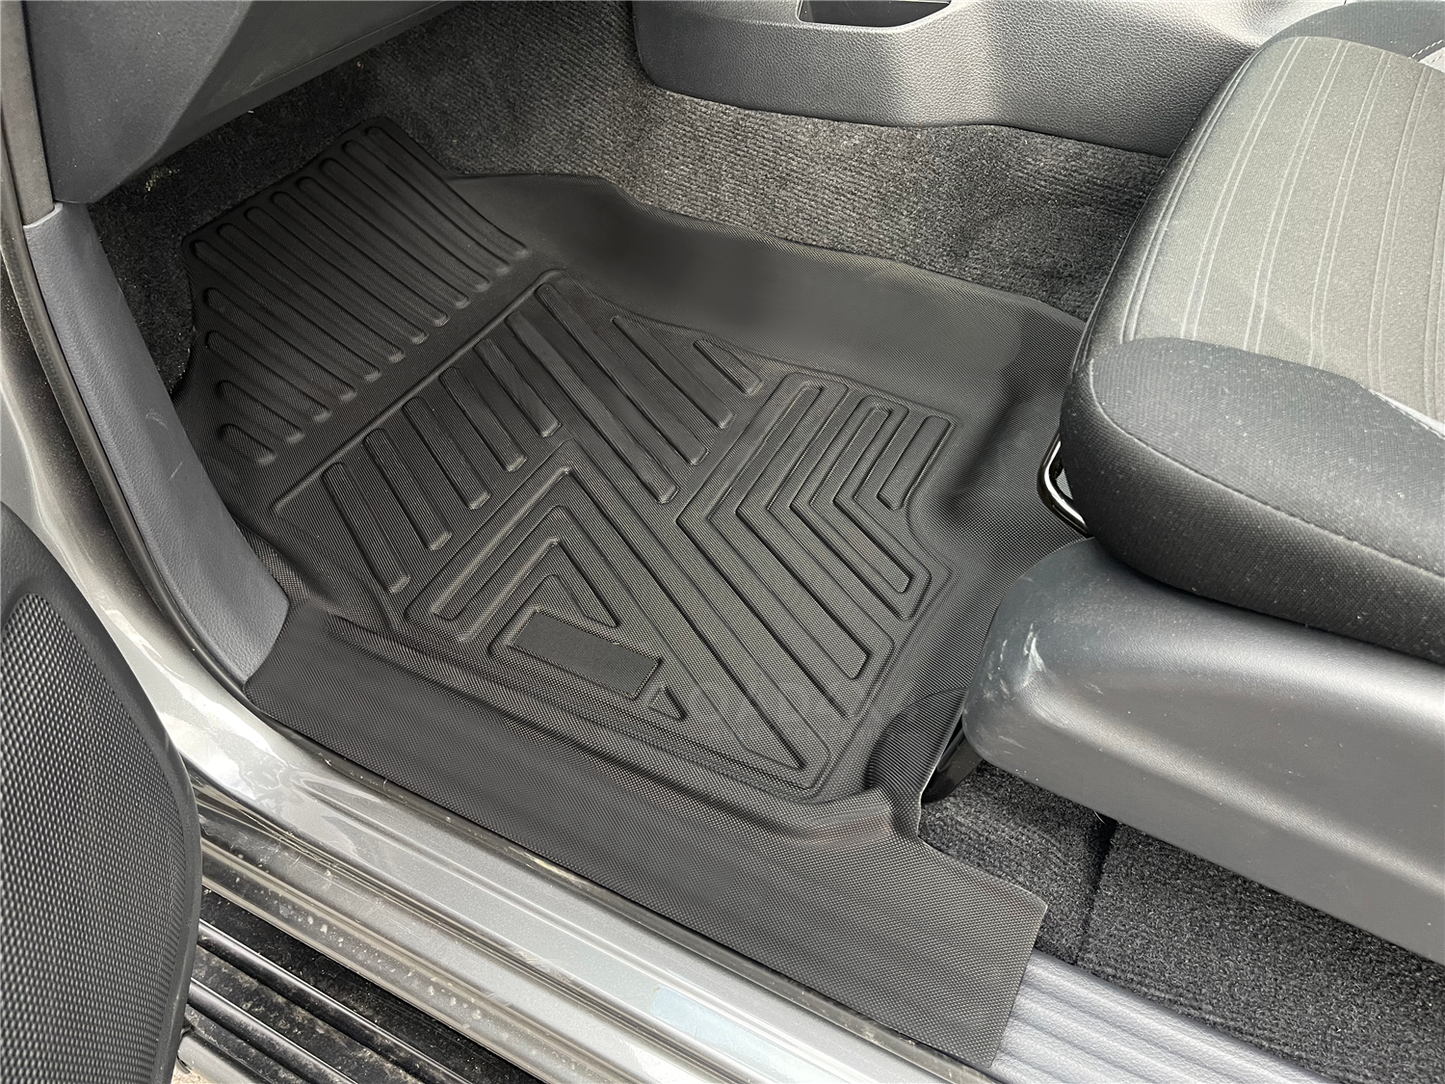 5D TPE Floor Mats for Nissan Navara NP300 D23 Dual Cab 2015-Onwards Without Cup Holder Tailored Door Sill Covered Car Floor Mat Liner